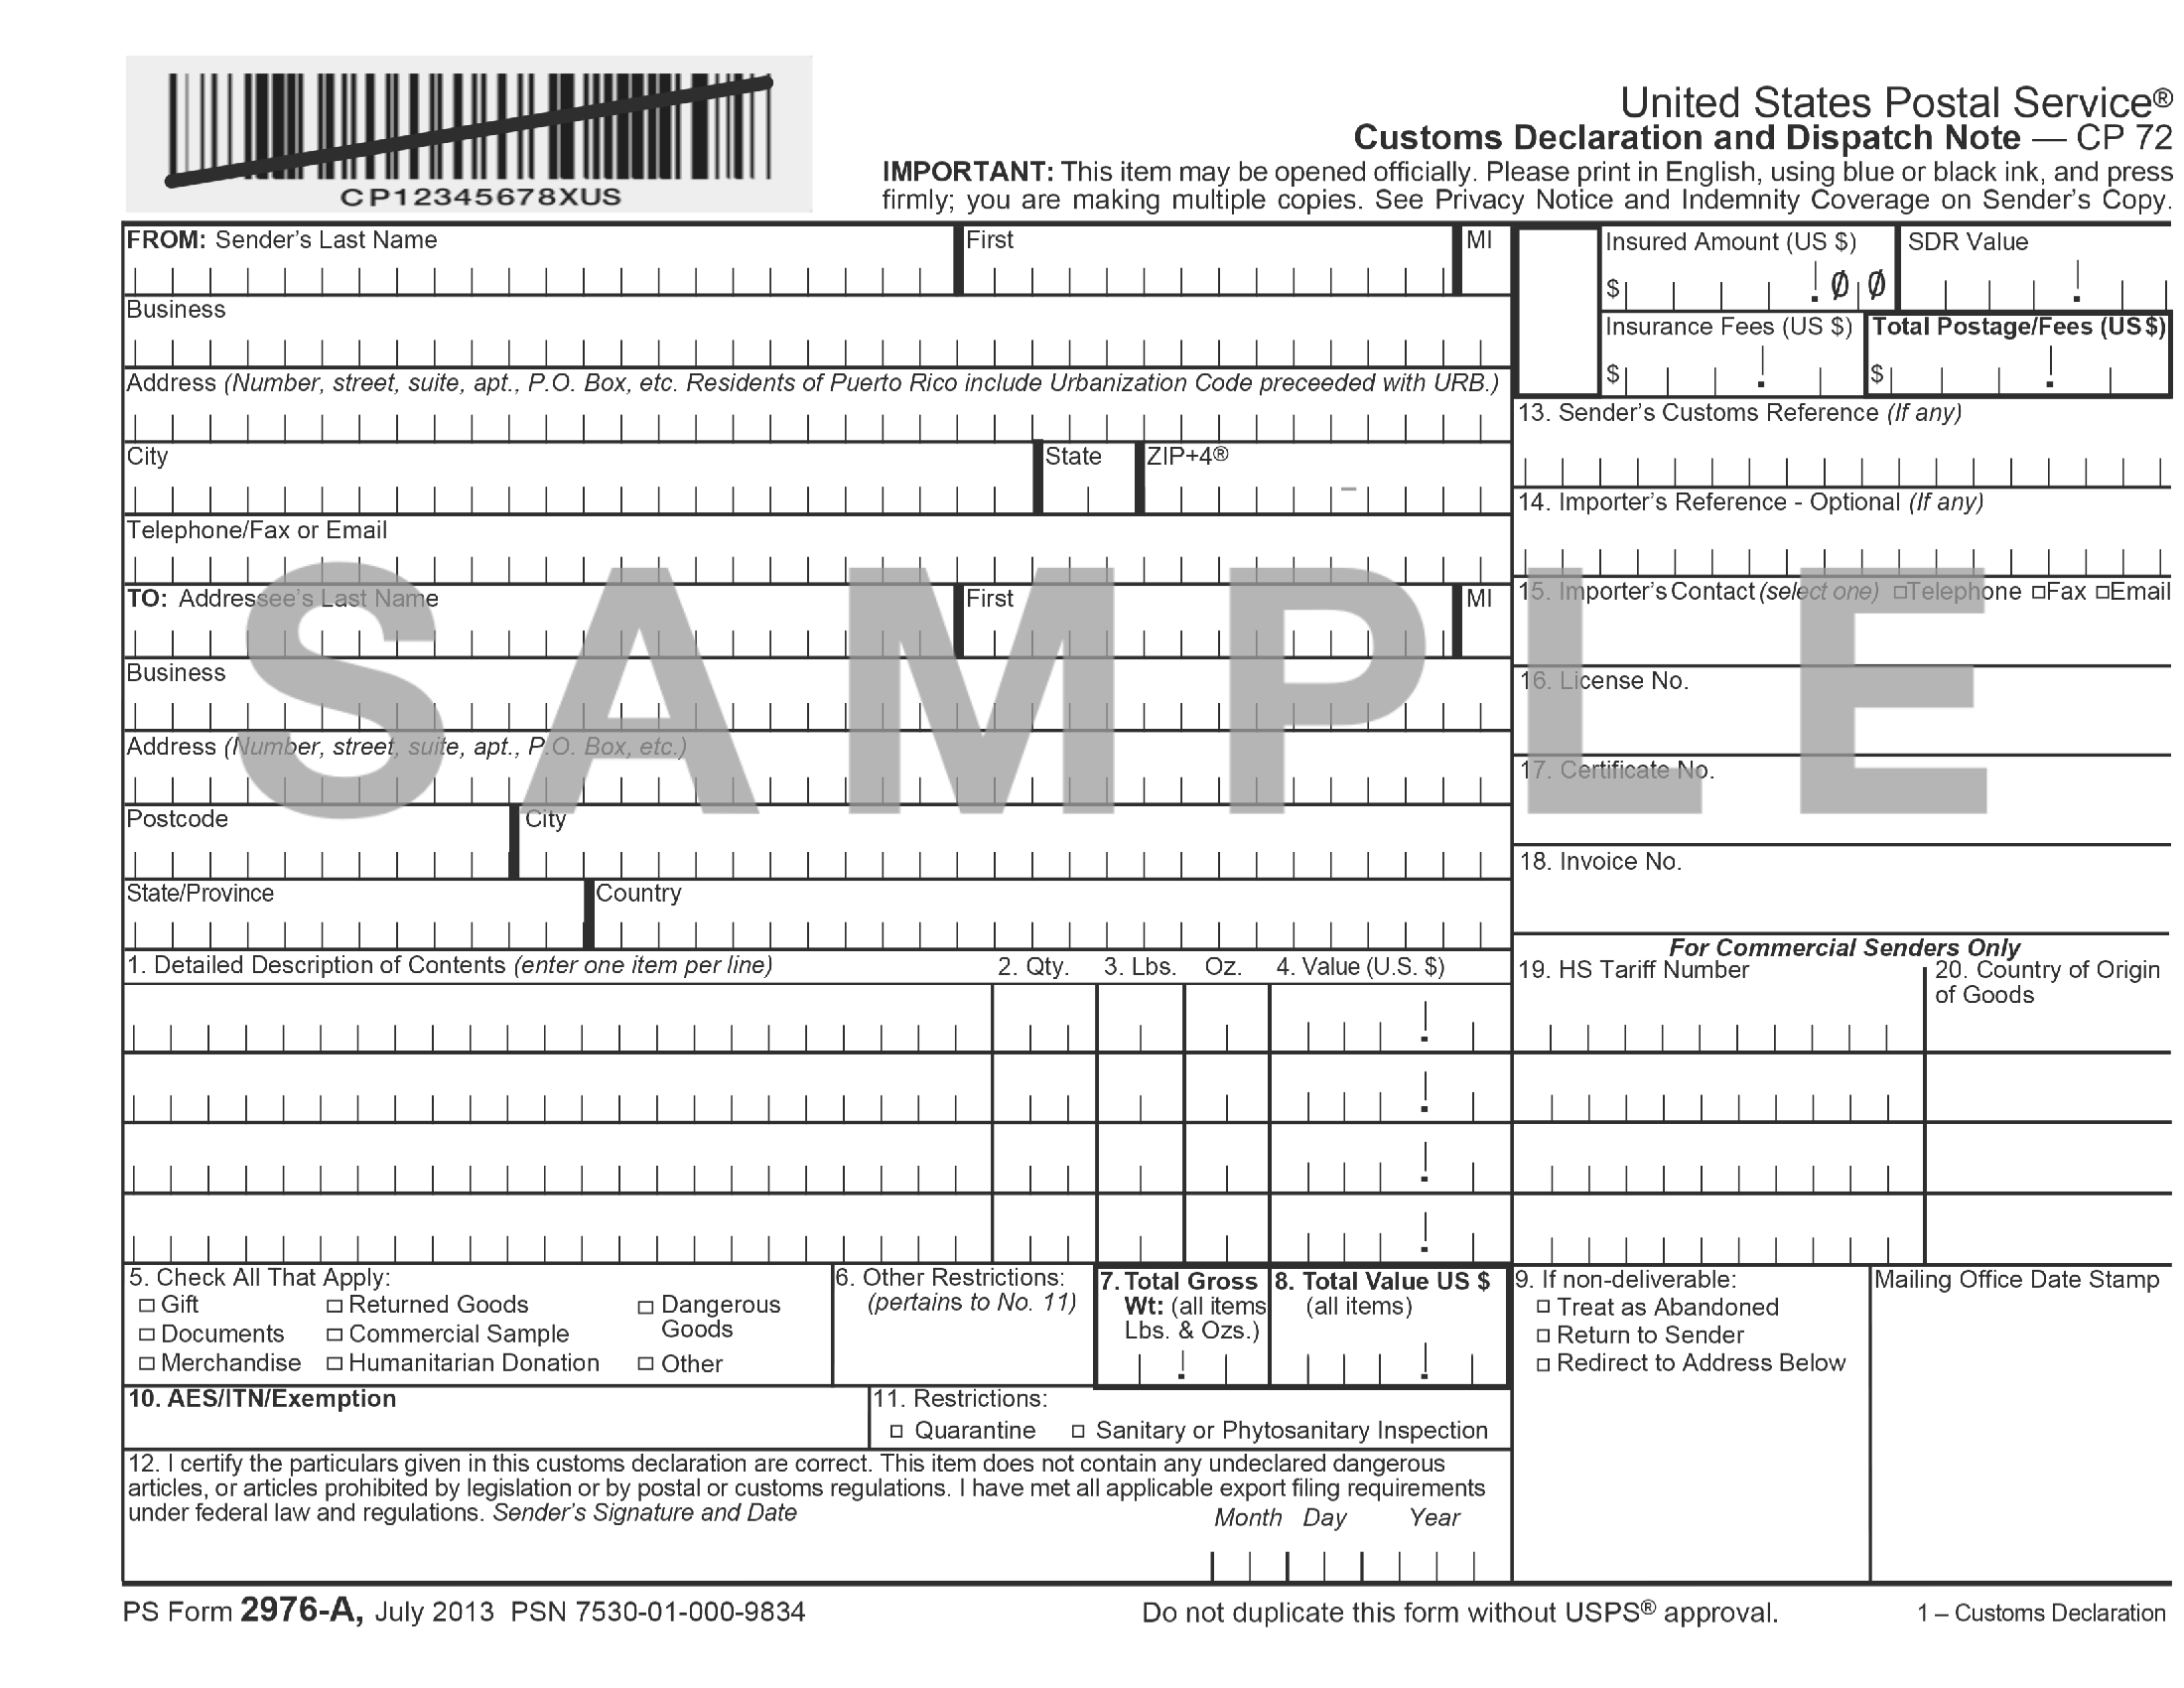 PS Form 2976 A Customs Declaration And Dispatch Note CP 72 Forms